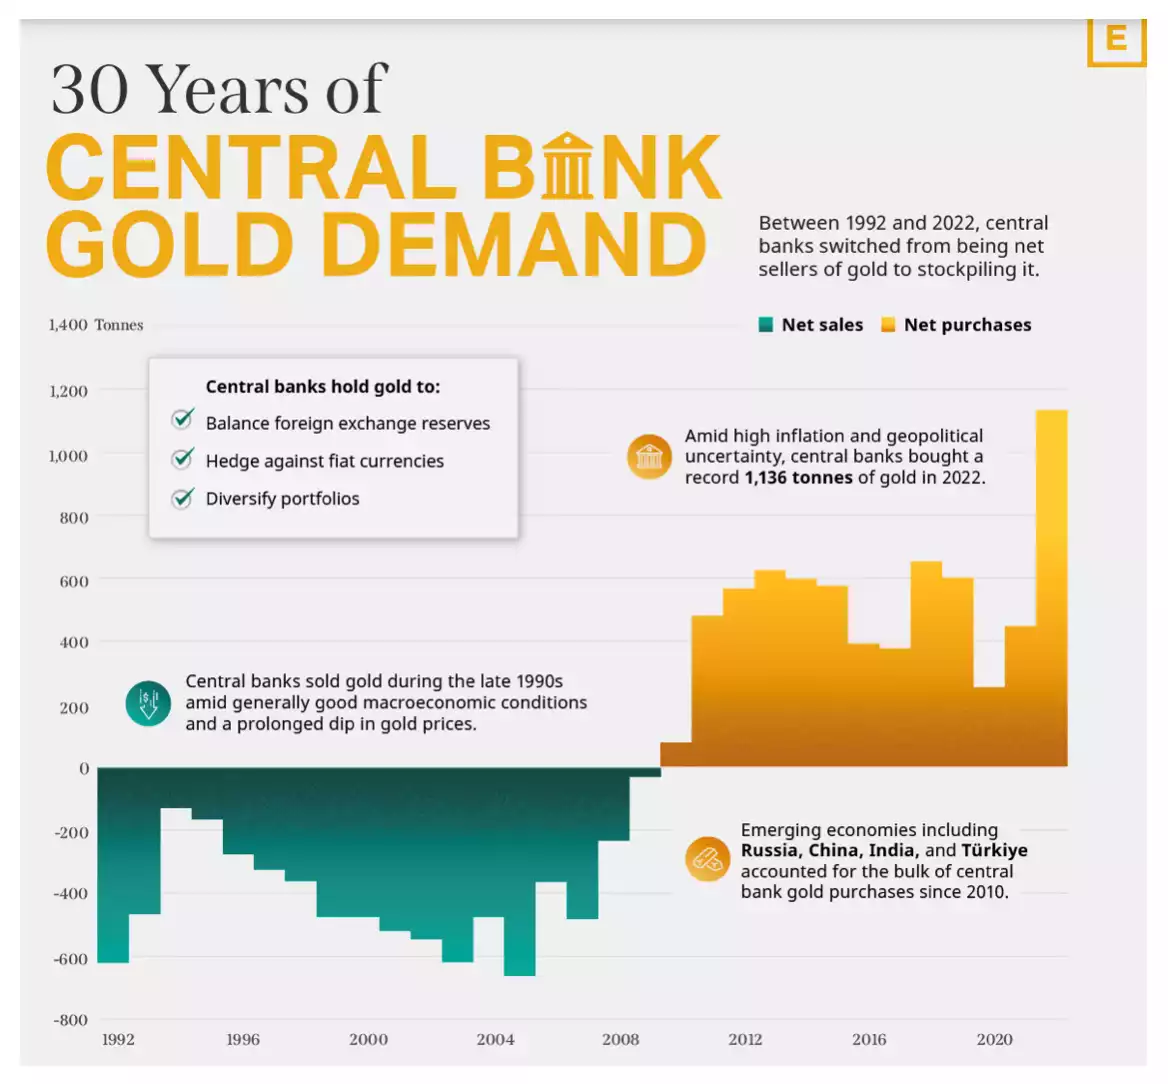 30 Years of Central Bank Gold Demand chart